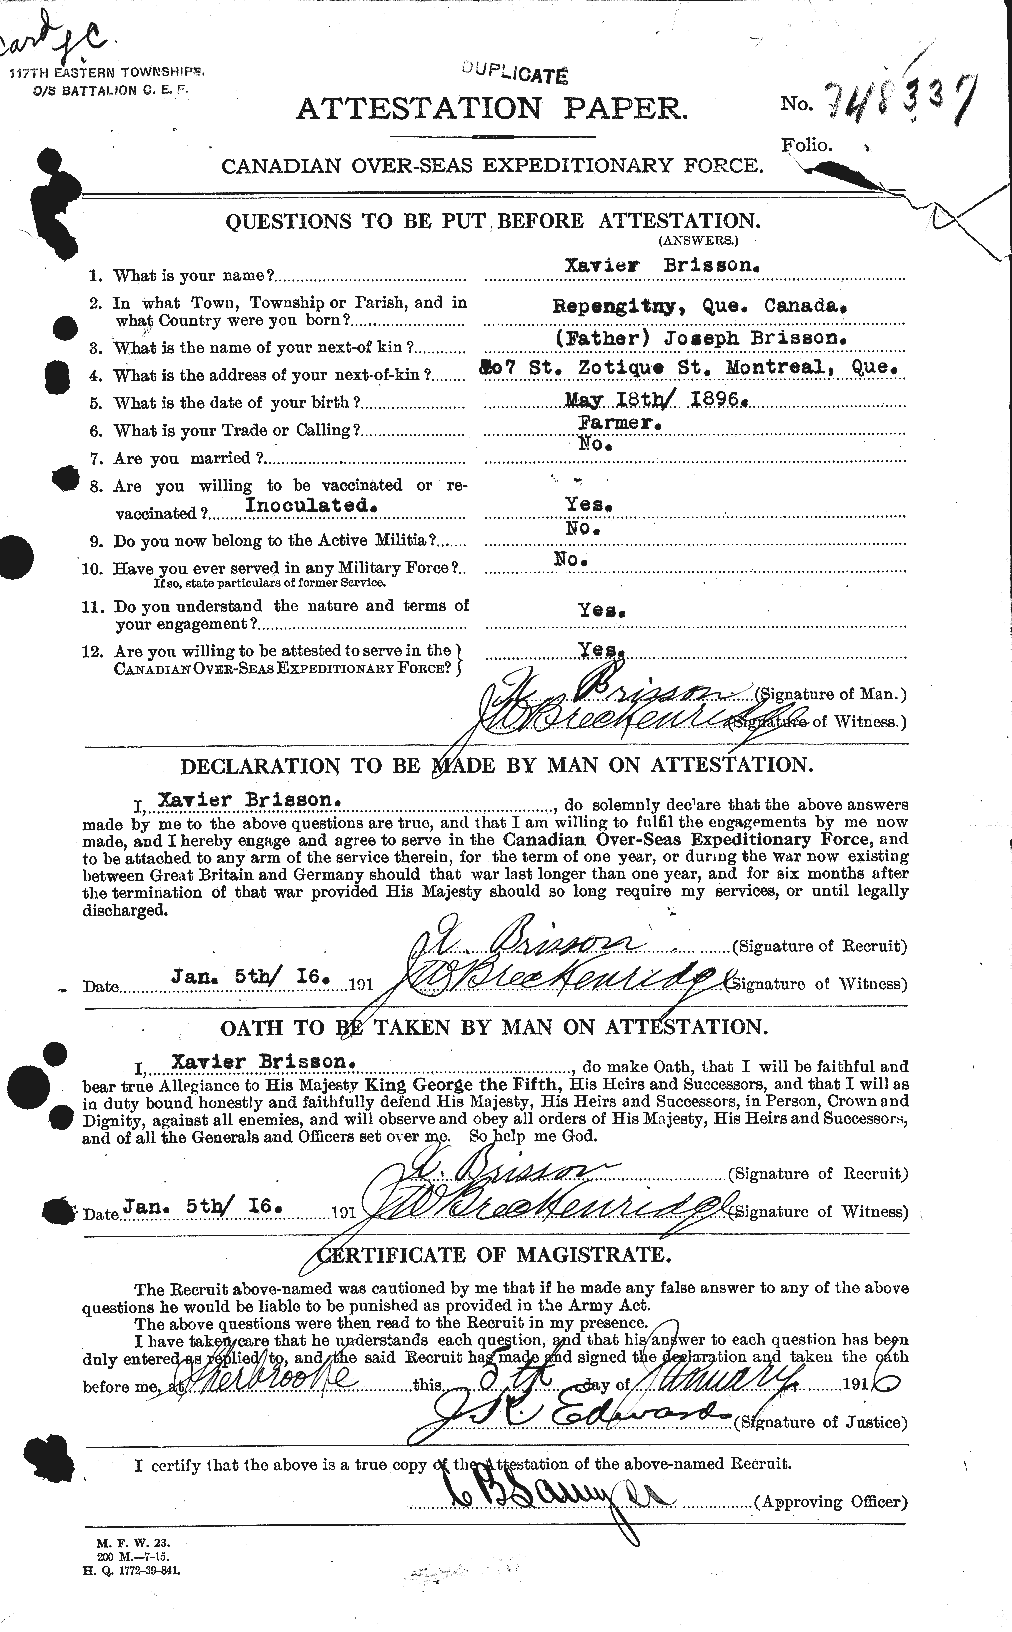 Personnel Records of the First World War - CEF 260306a